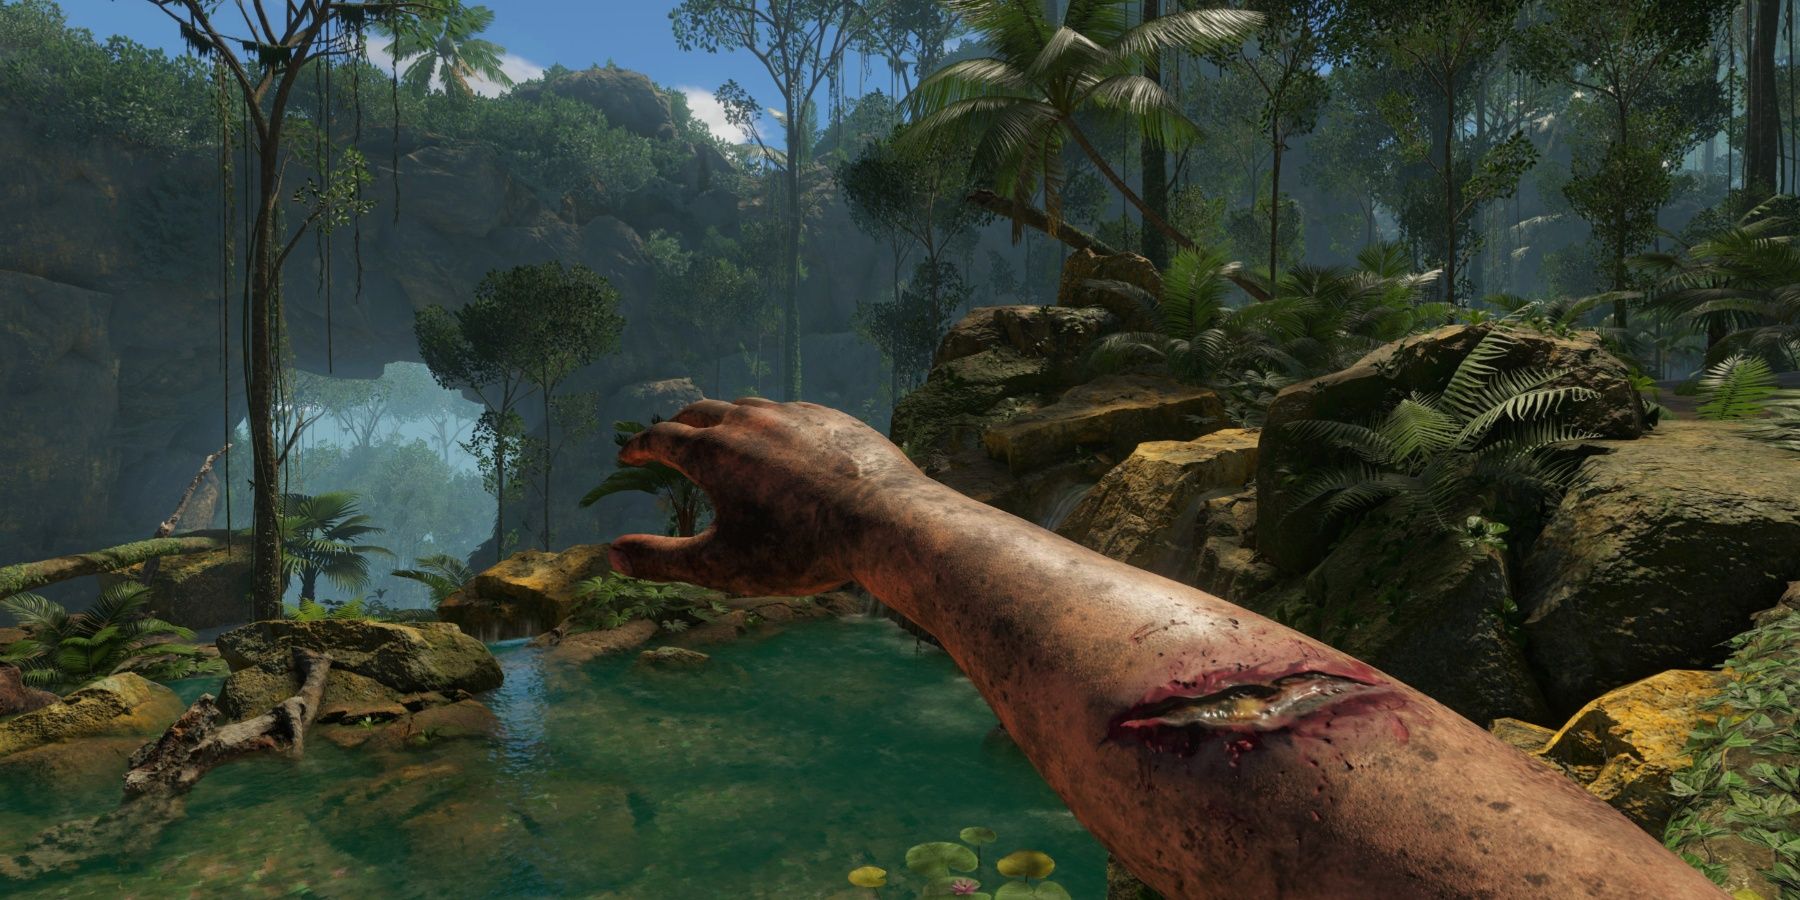 The players arm, which has a gash in it, reaching out over a lake in the rainforest in Green Hell